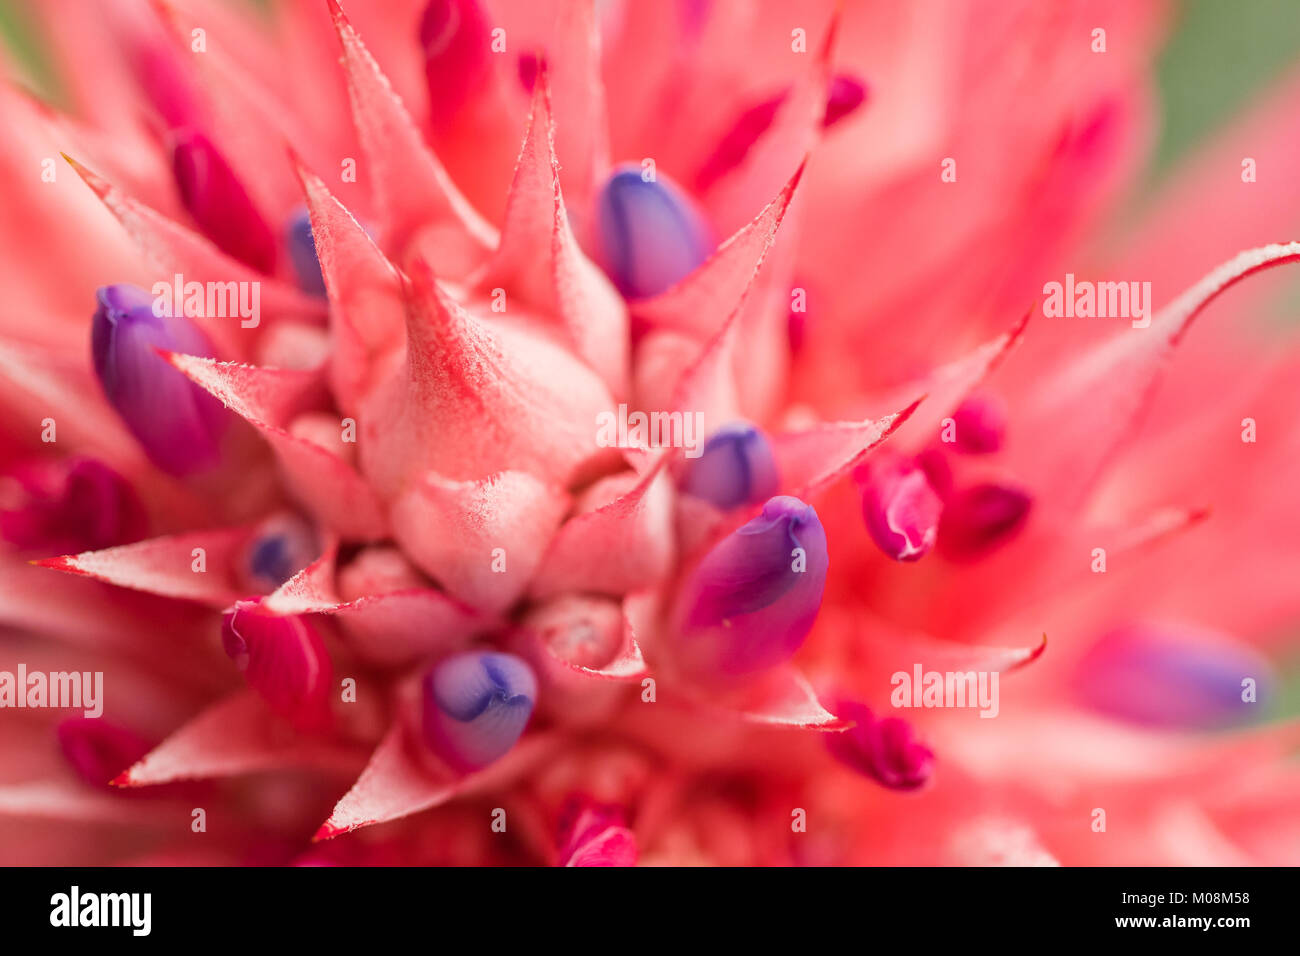 Aechmea fasciata (Silver vase or Urn plant) is a species of flowering plant in the bromeliad family, native to Brazil. Close up. Selective focus. Shal Stock Photo